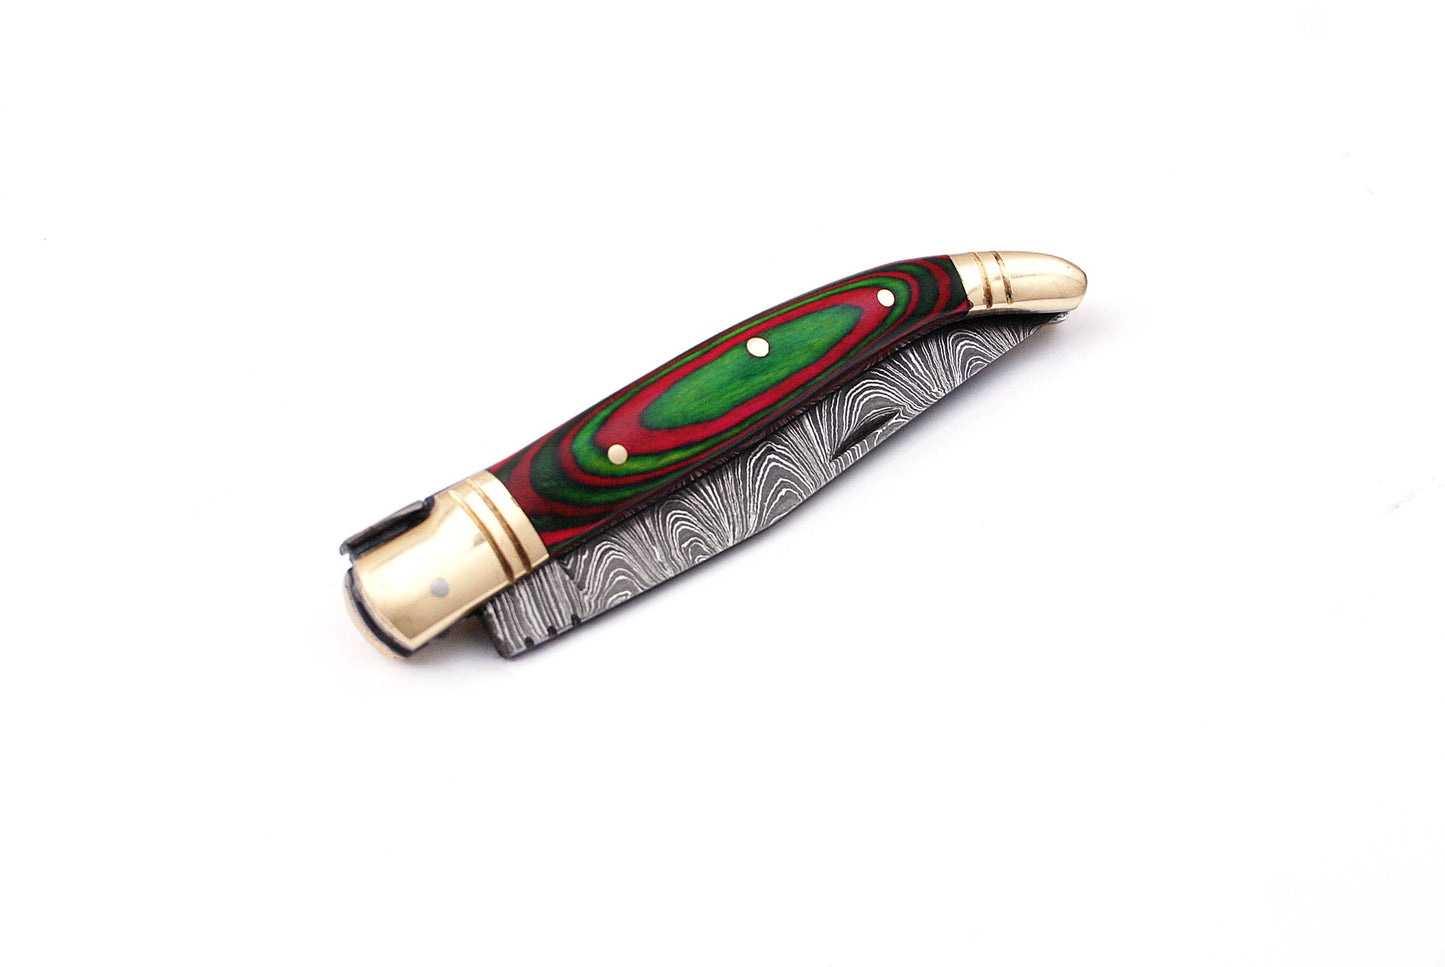 Copy of Copy of Laguiole Folding Damascus steel knife, 8.5" Long with 4" hand forged custom twist pattern Blade. Red & Green wood scale with brass bolster, Cow hide leather sheath included